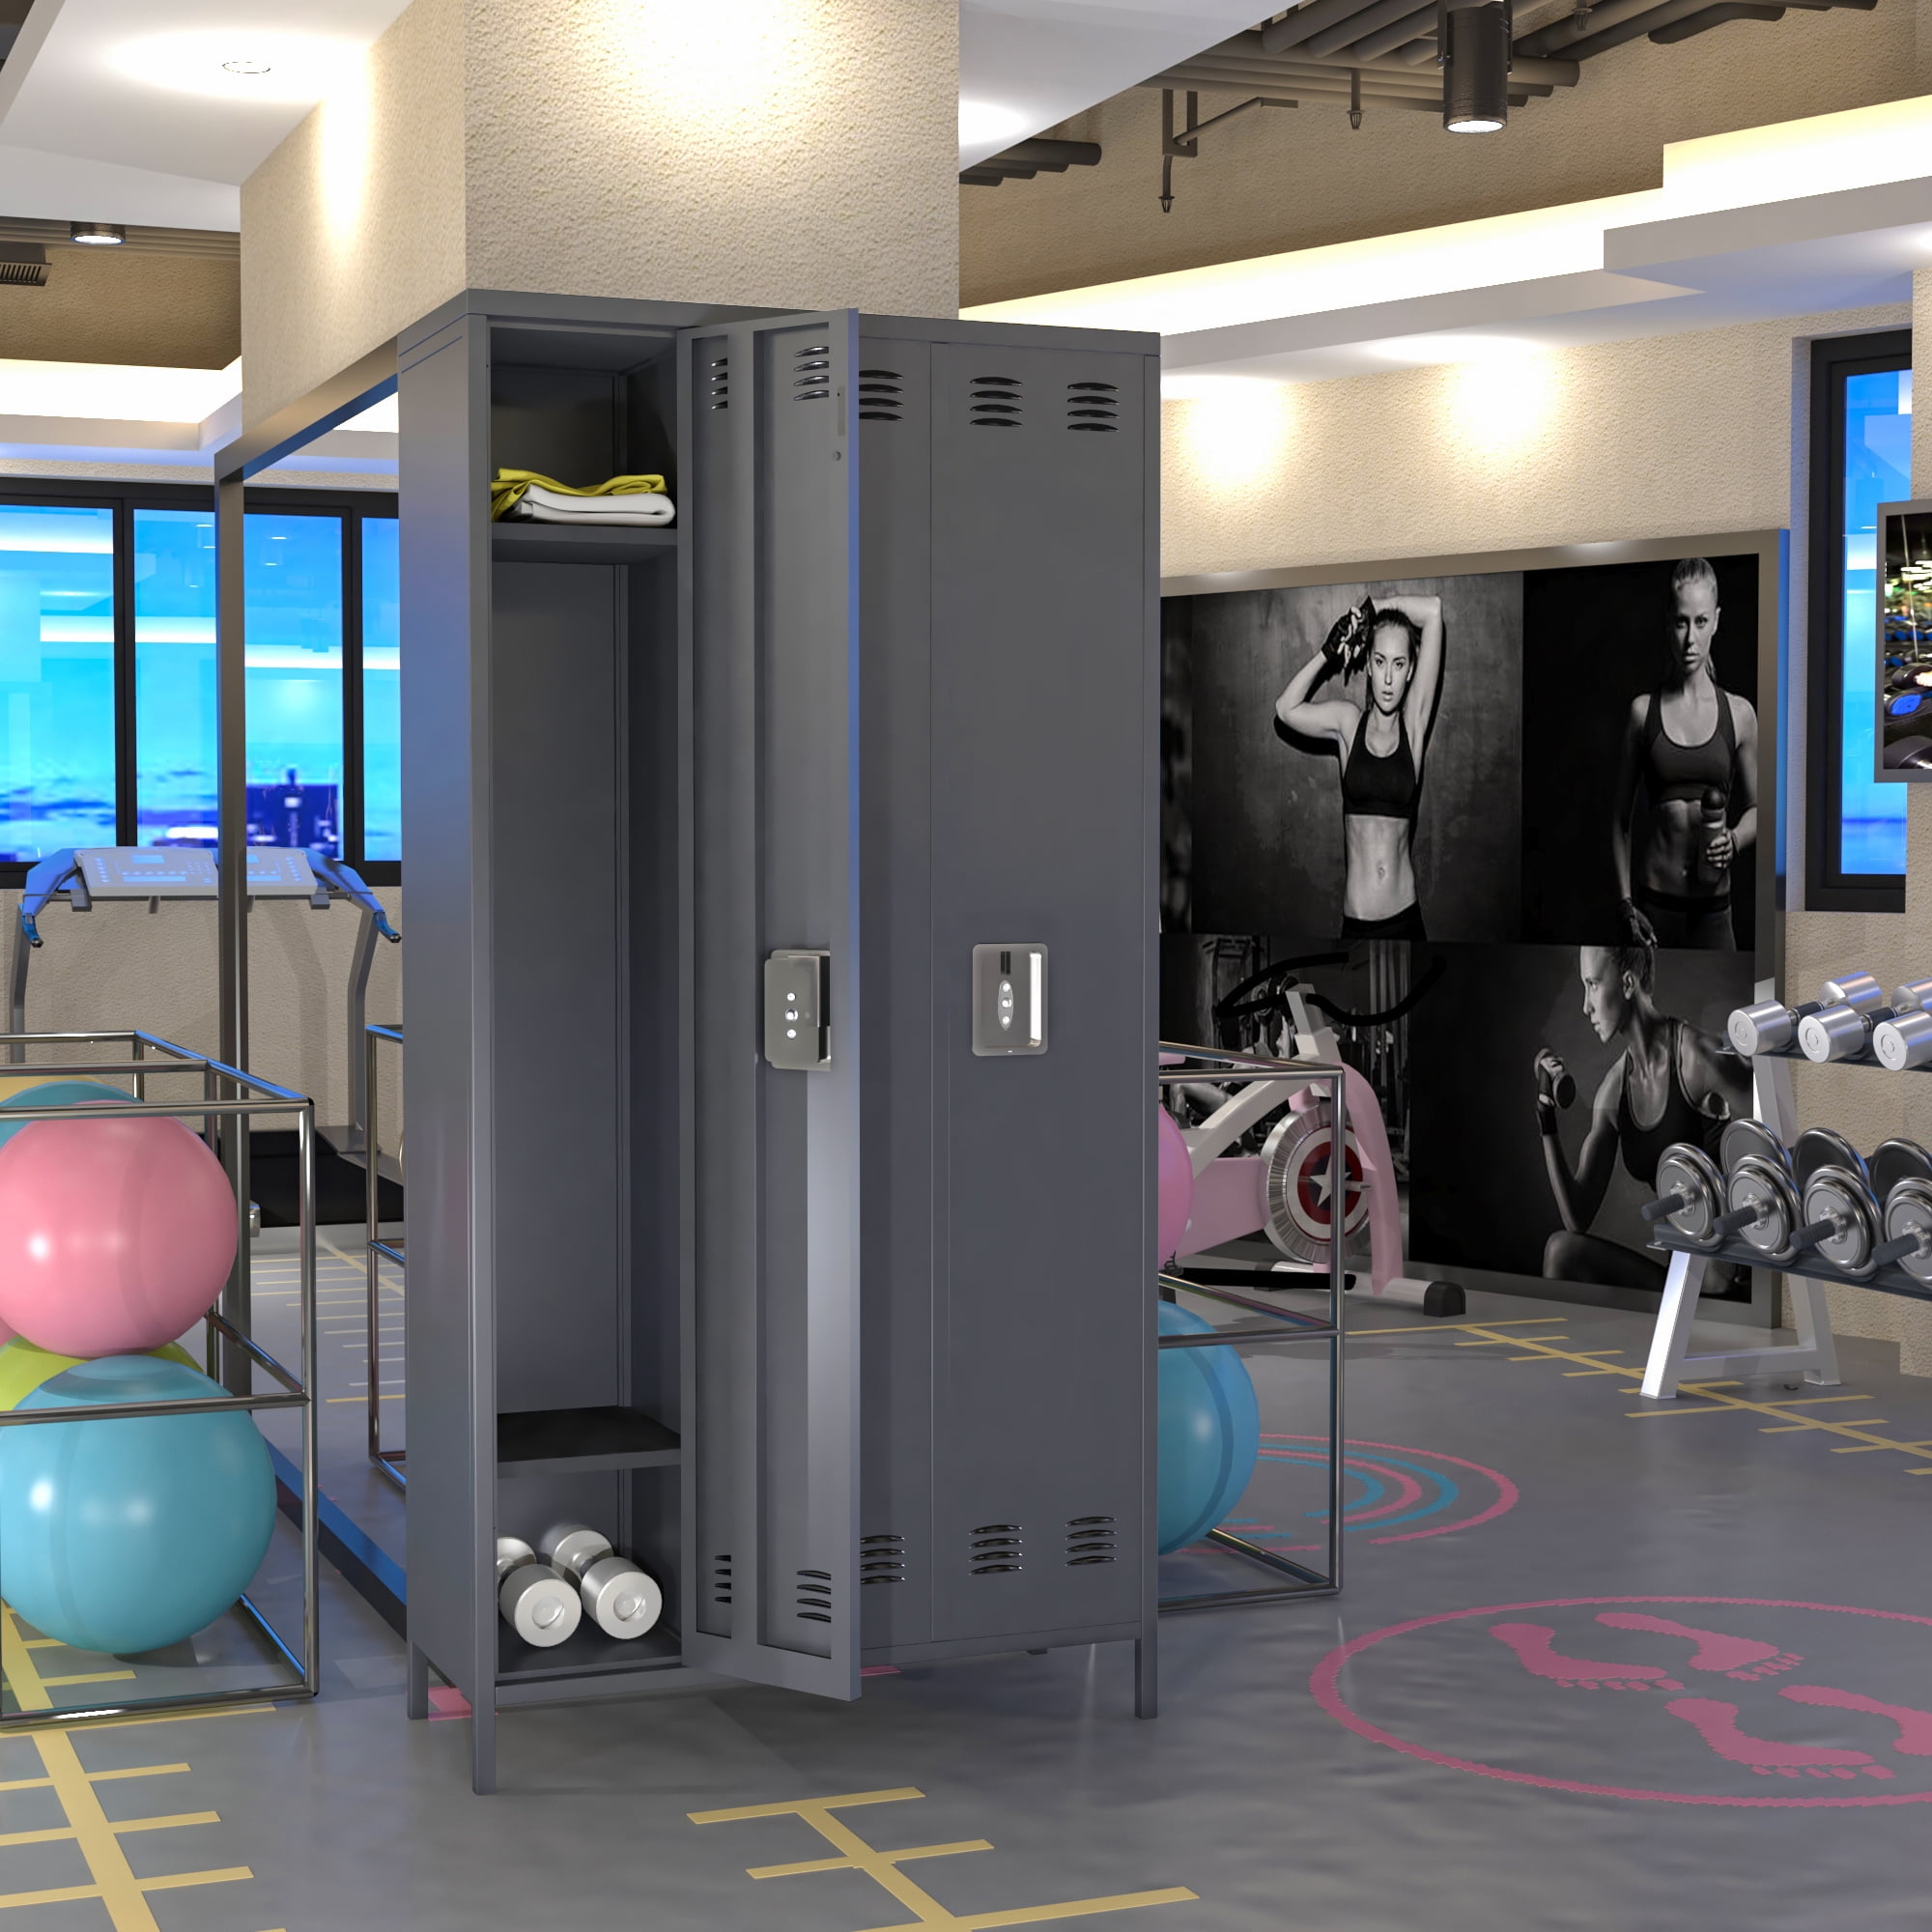 Buy Wholesale nfc gym locker to Store and Organize Stuff 